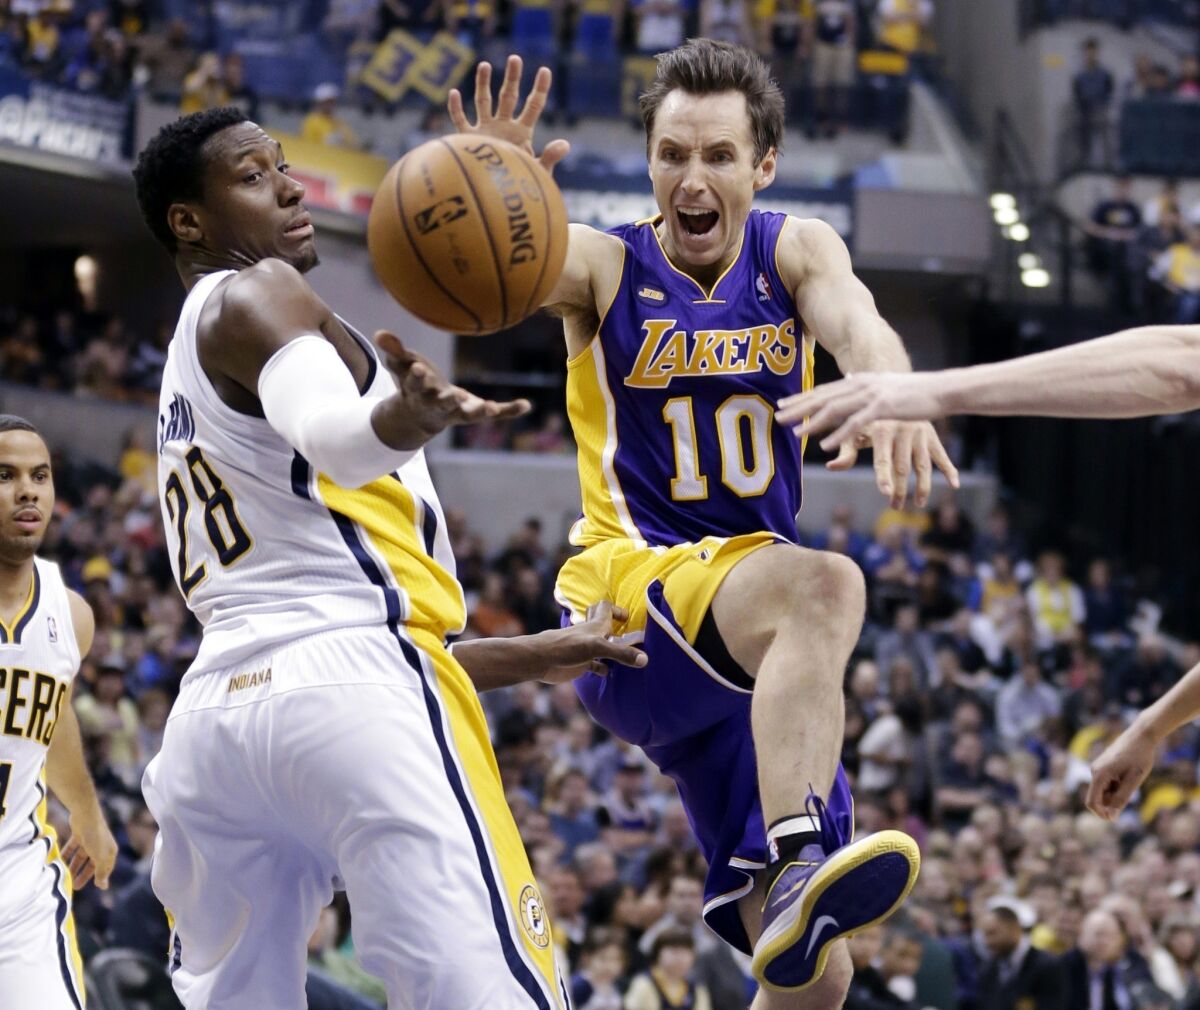 Lakers guard Steve Nash in action against the Indiana Pacers on March 15. Nash has been sidelined since March 28 with hip and hamstring soreness